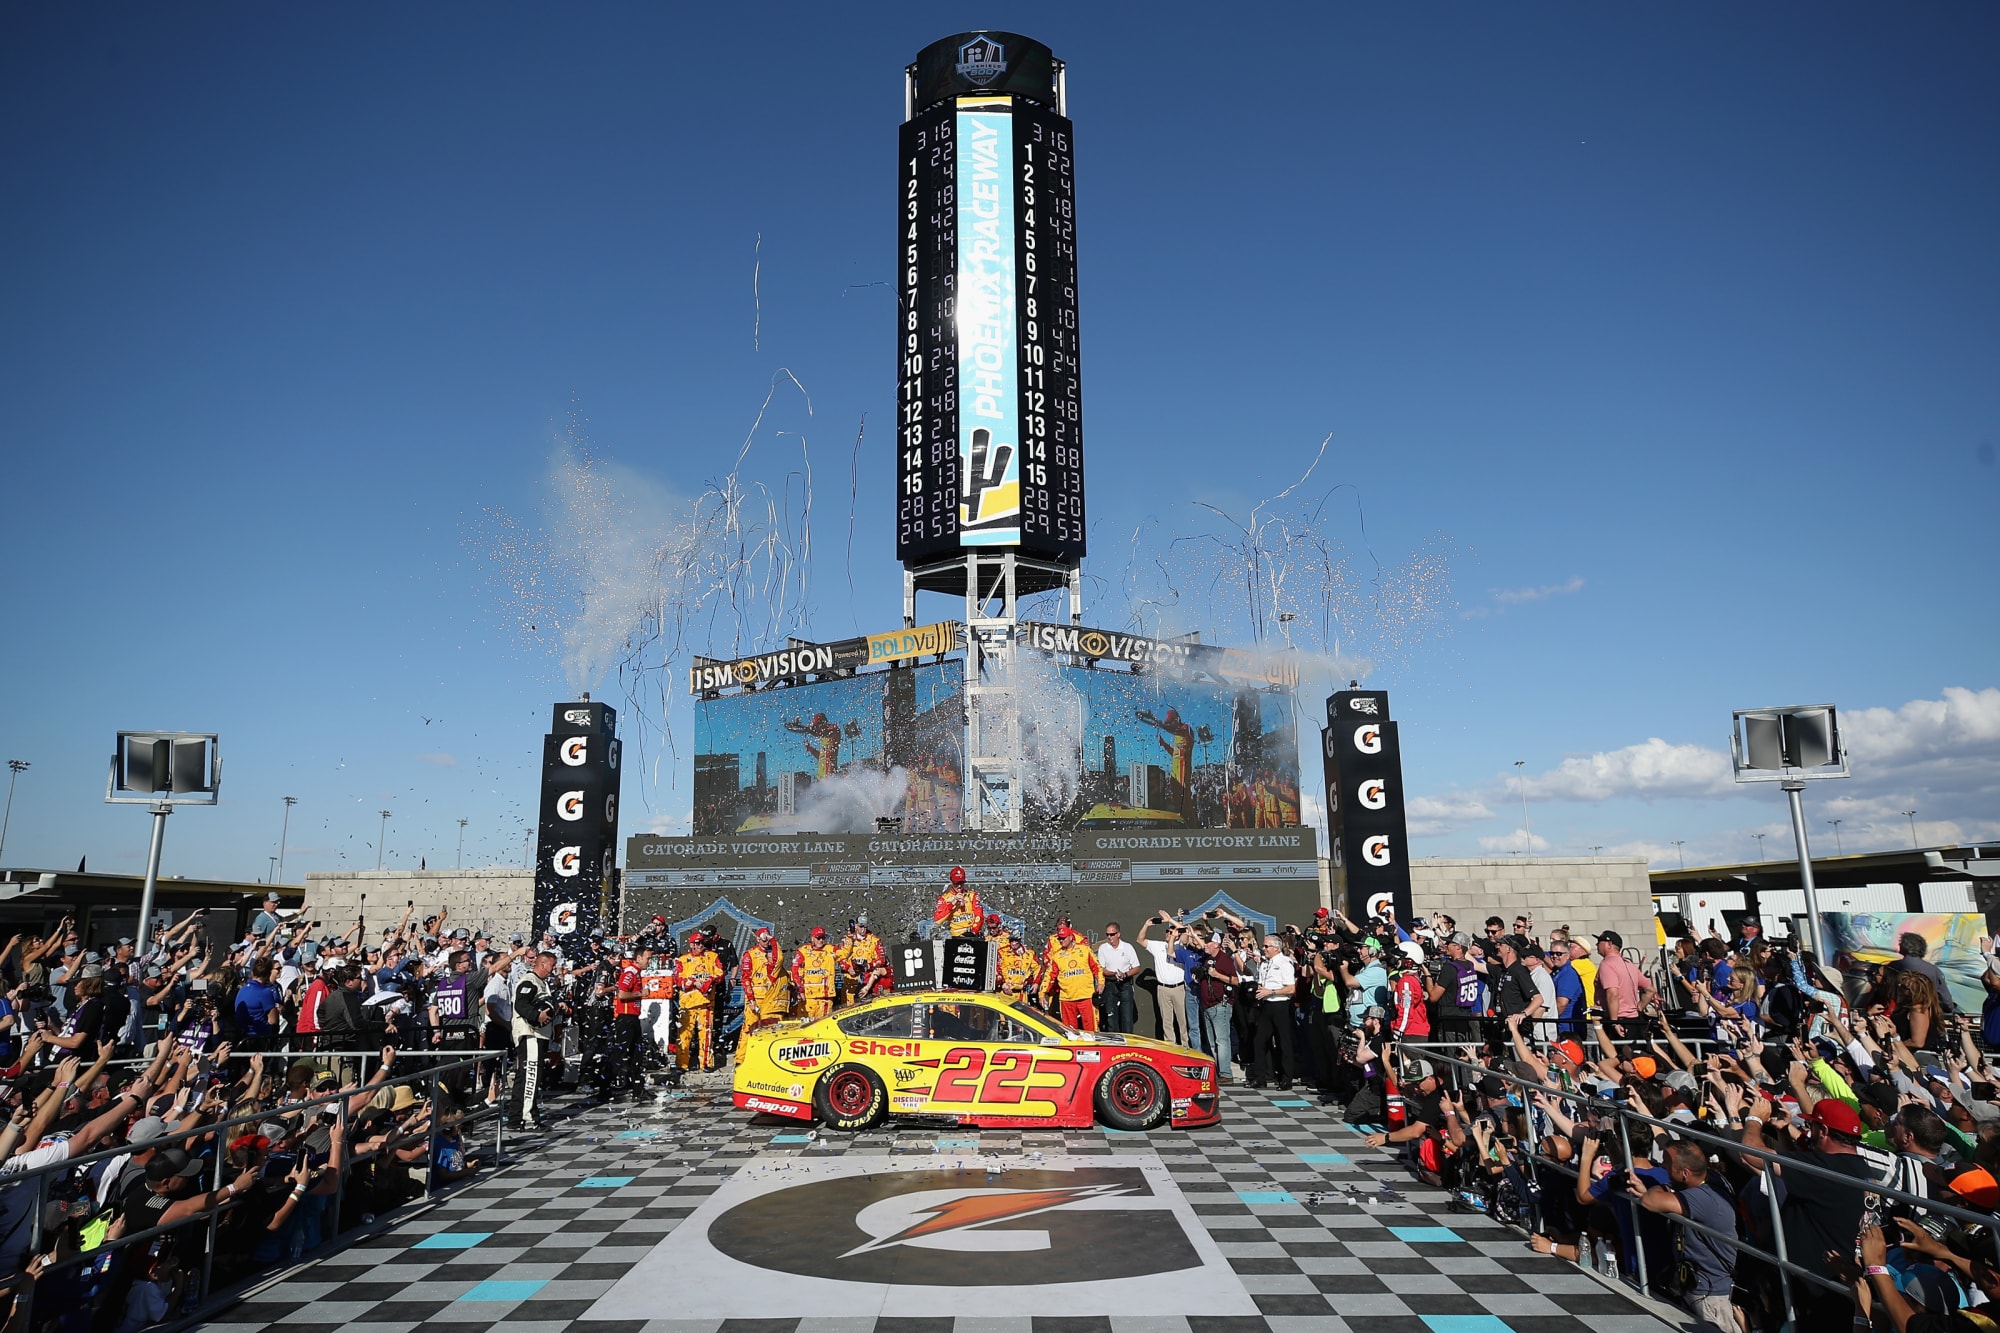 NASCAR: After Phoenix, the first month without any live racing